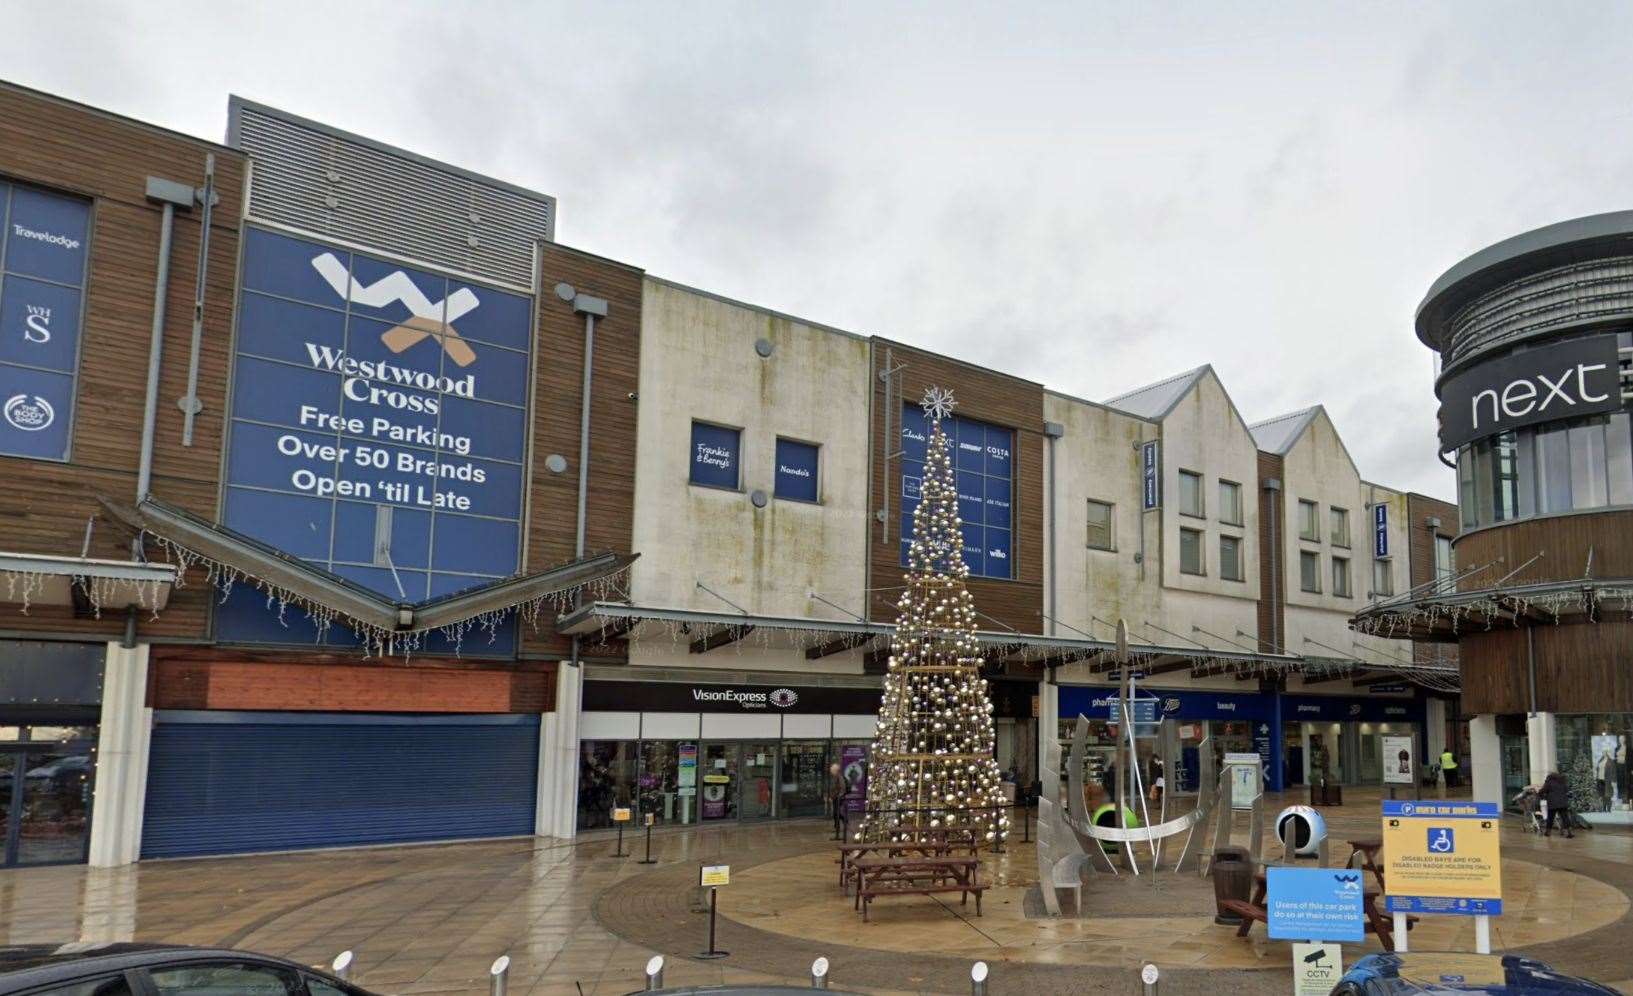 Westwood Cross, Broadstairs is holding its Christmas event on November 17